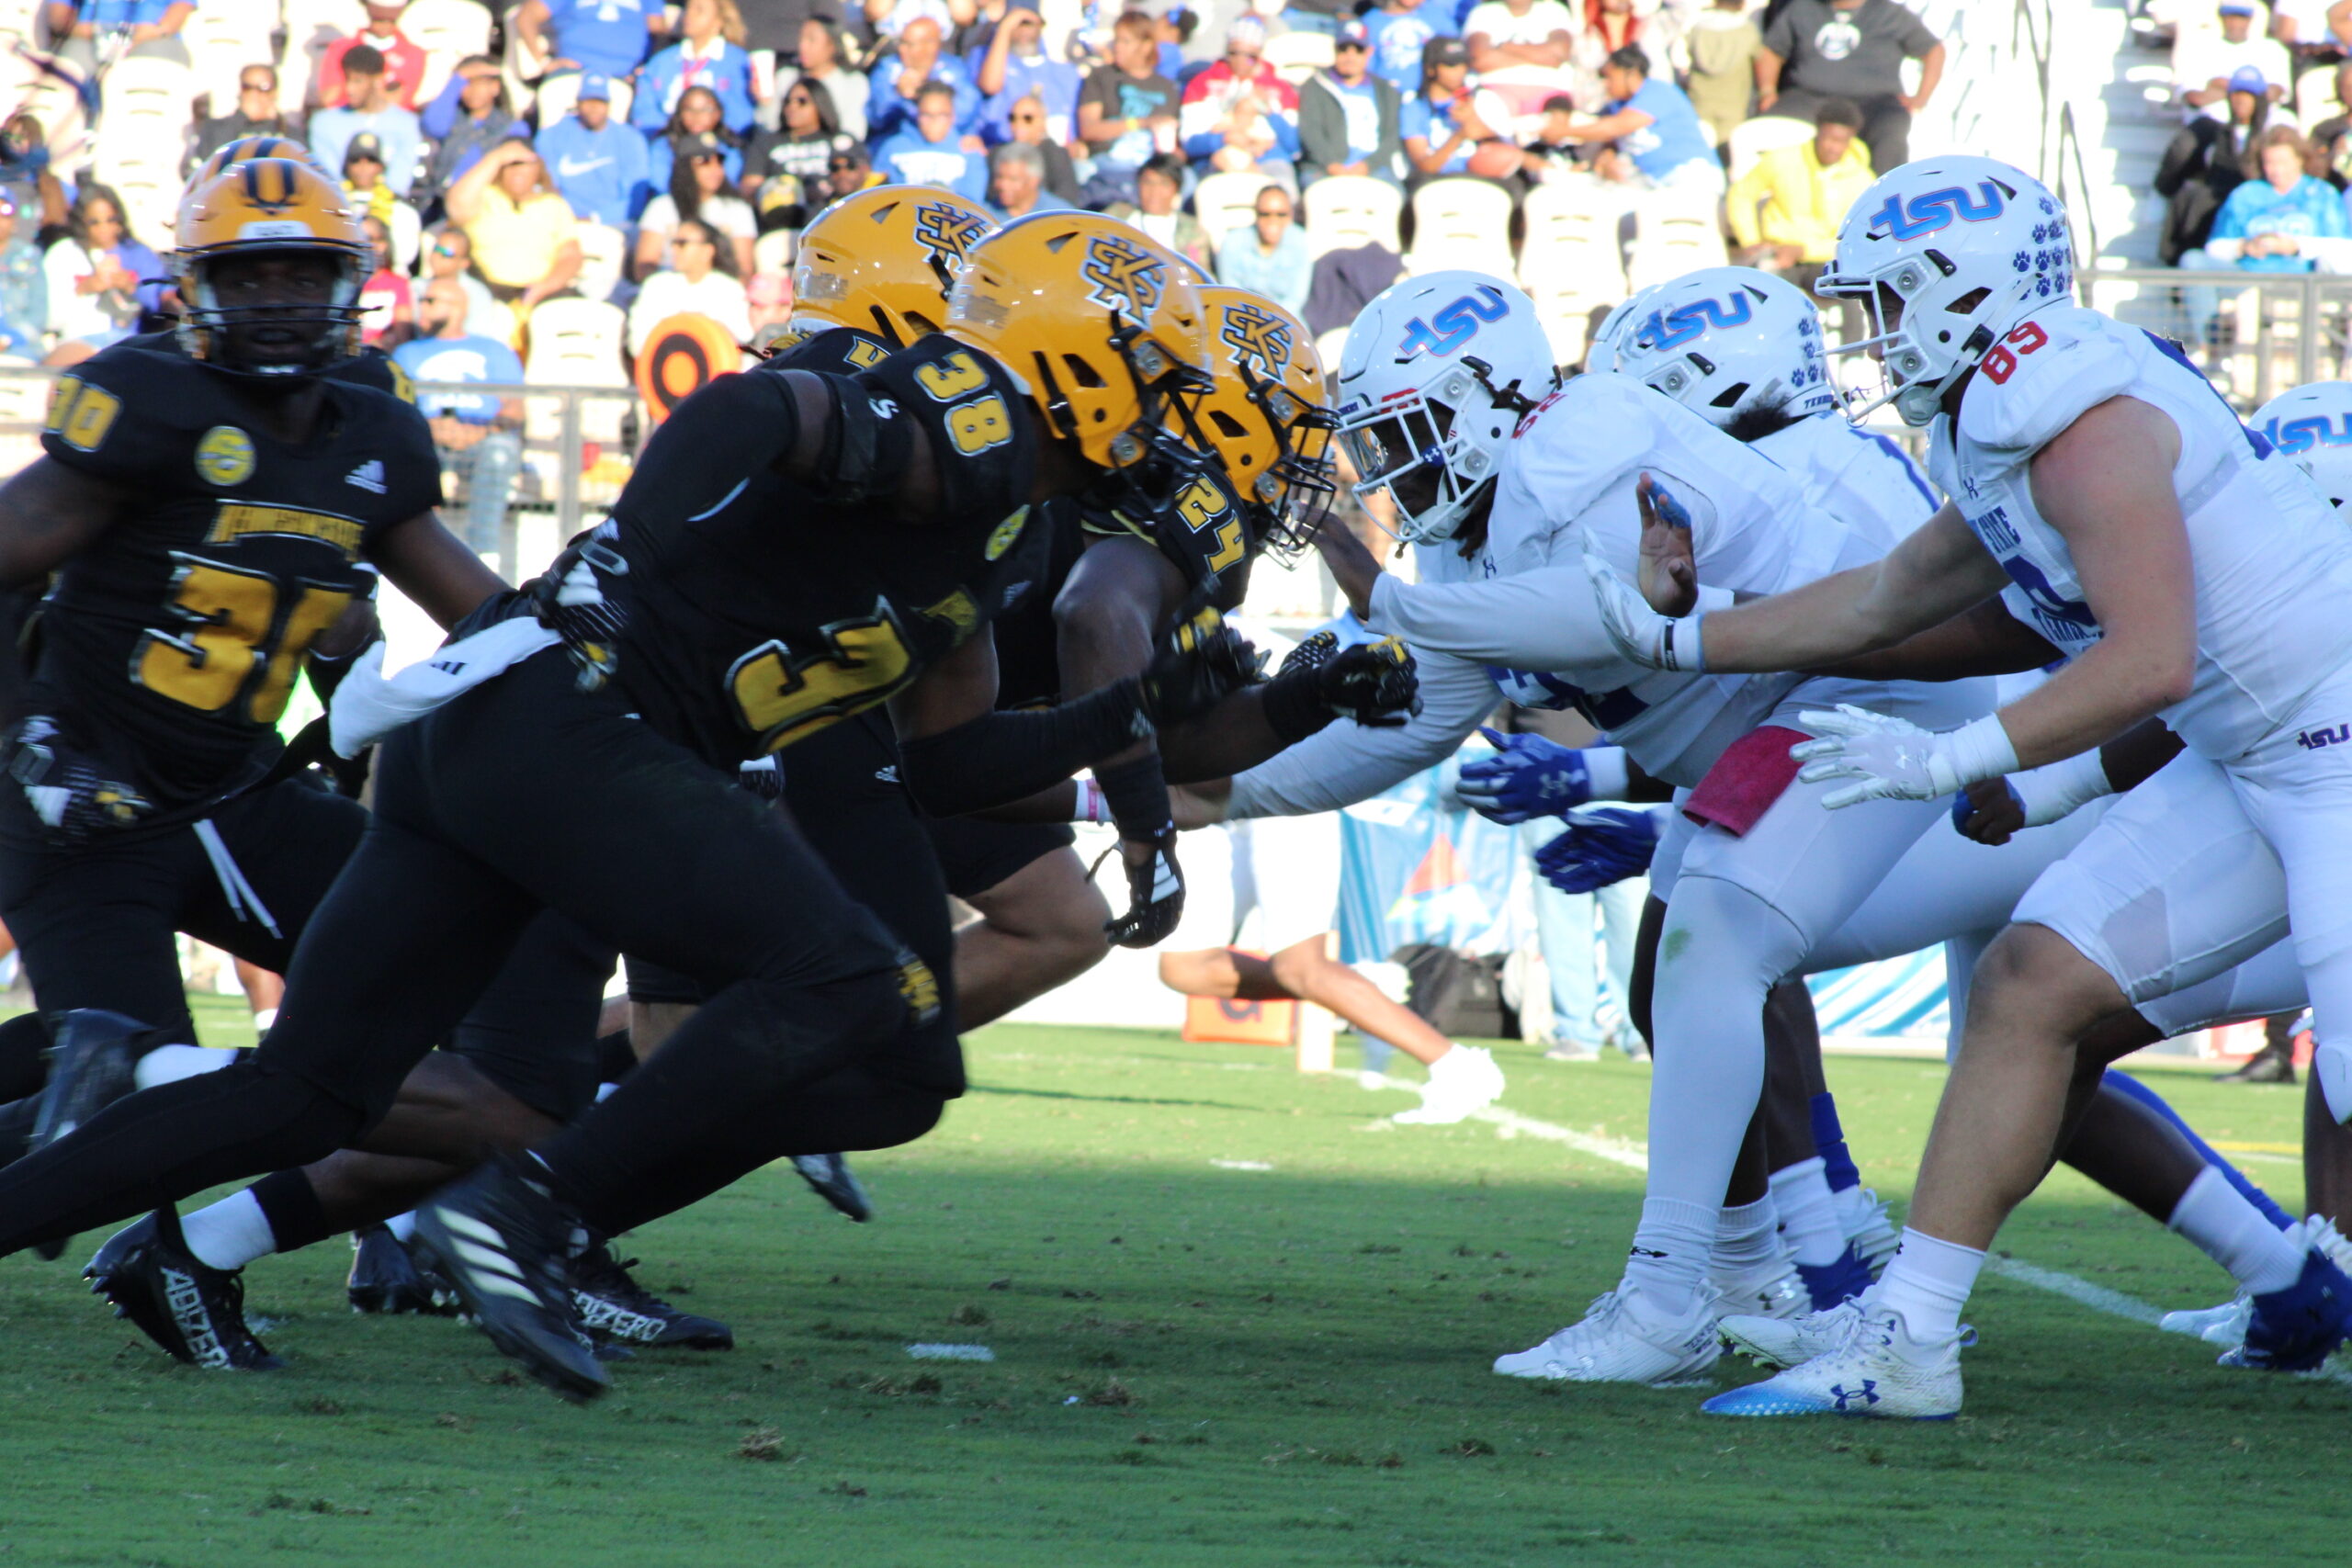 In a crushing defeat, the Tennessee State Tigers defeated the Kennesaw State Owls at the homecoming game.